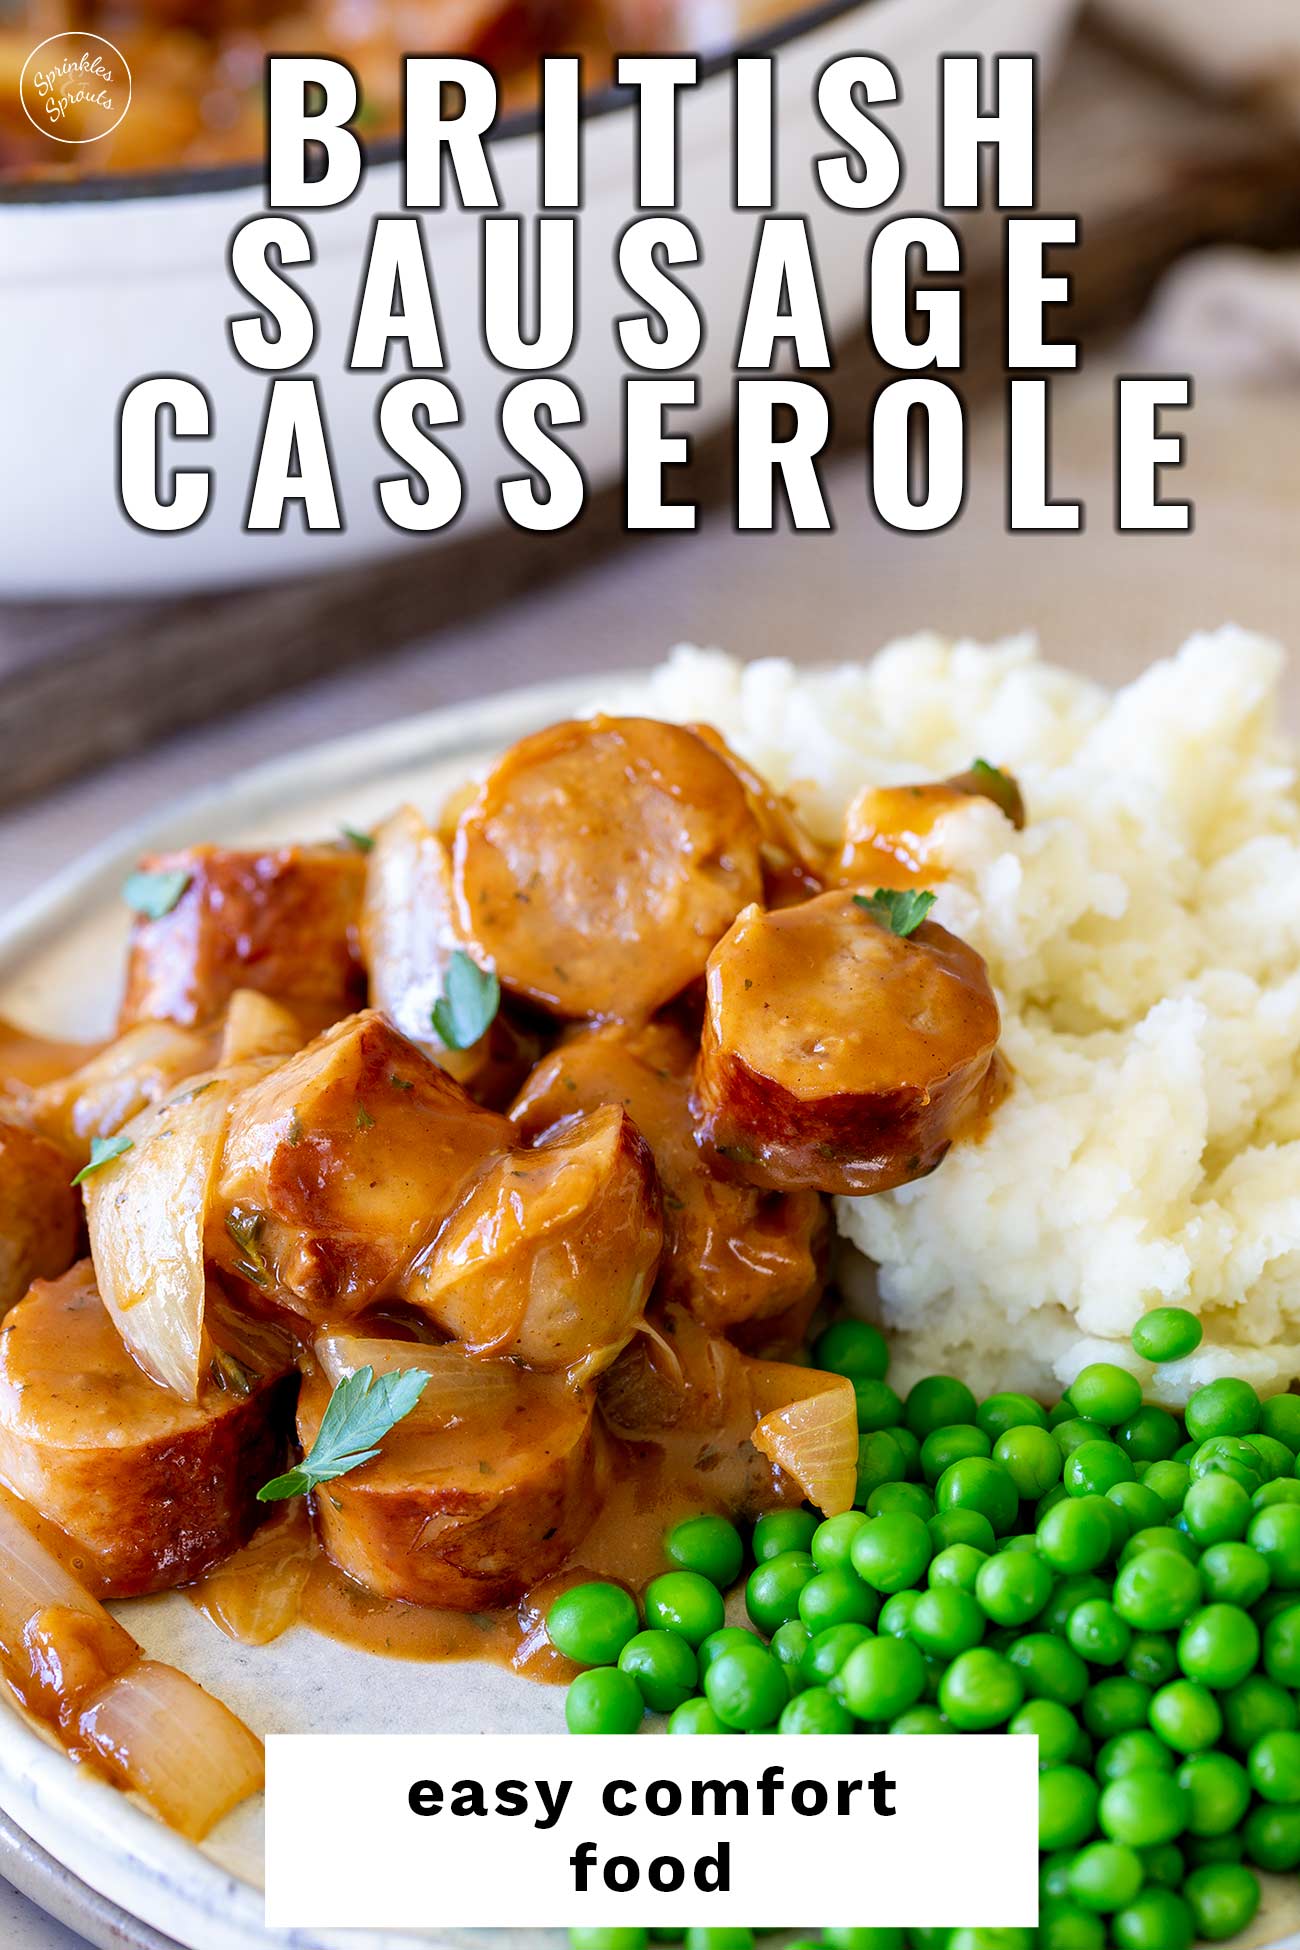 PINTEREST IMAGE: Sausage casserole with text overlay